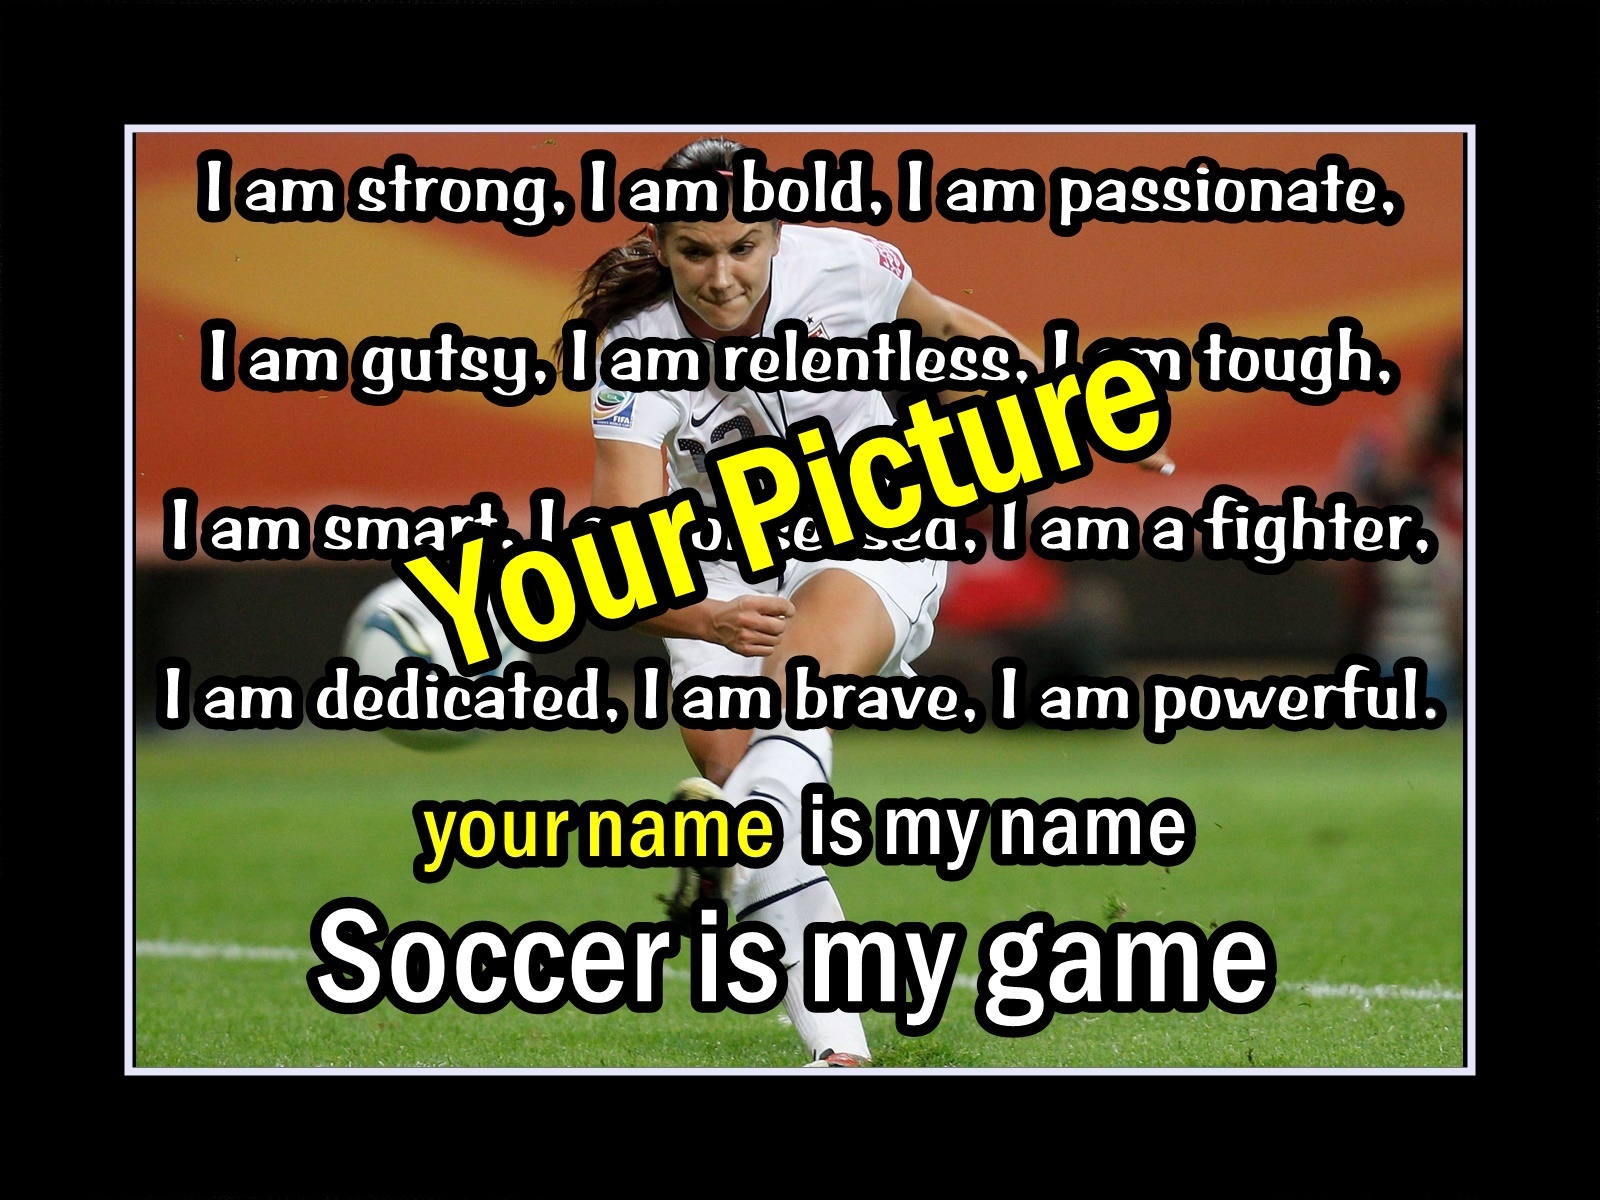 Rare Inspirational Personalized Custom Soccer Poster Unique Motivational Gift - $29.99 - $49.99